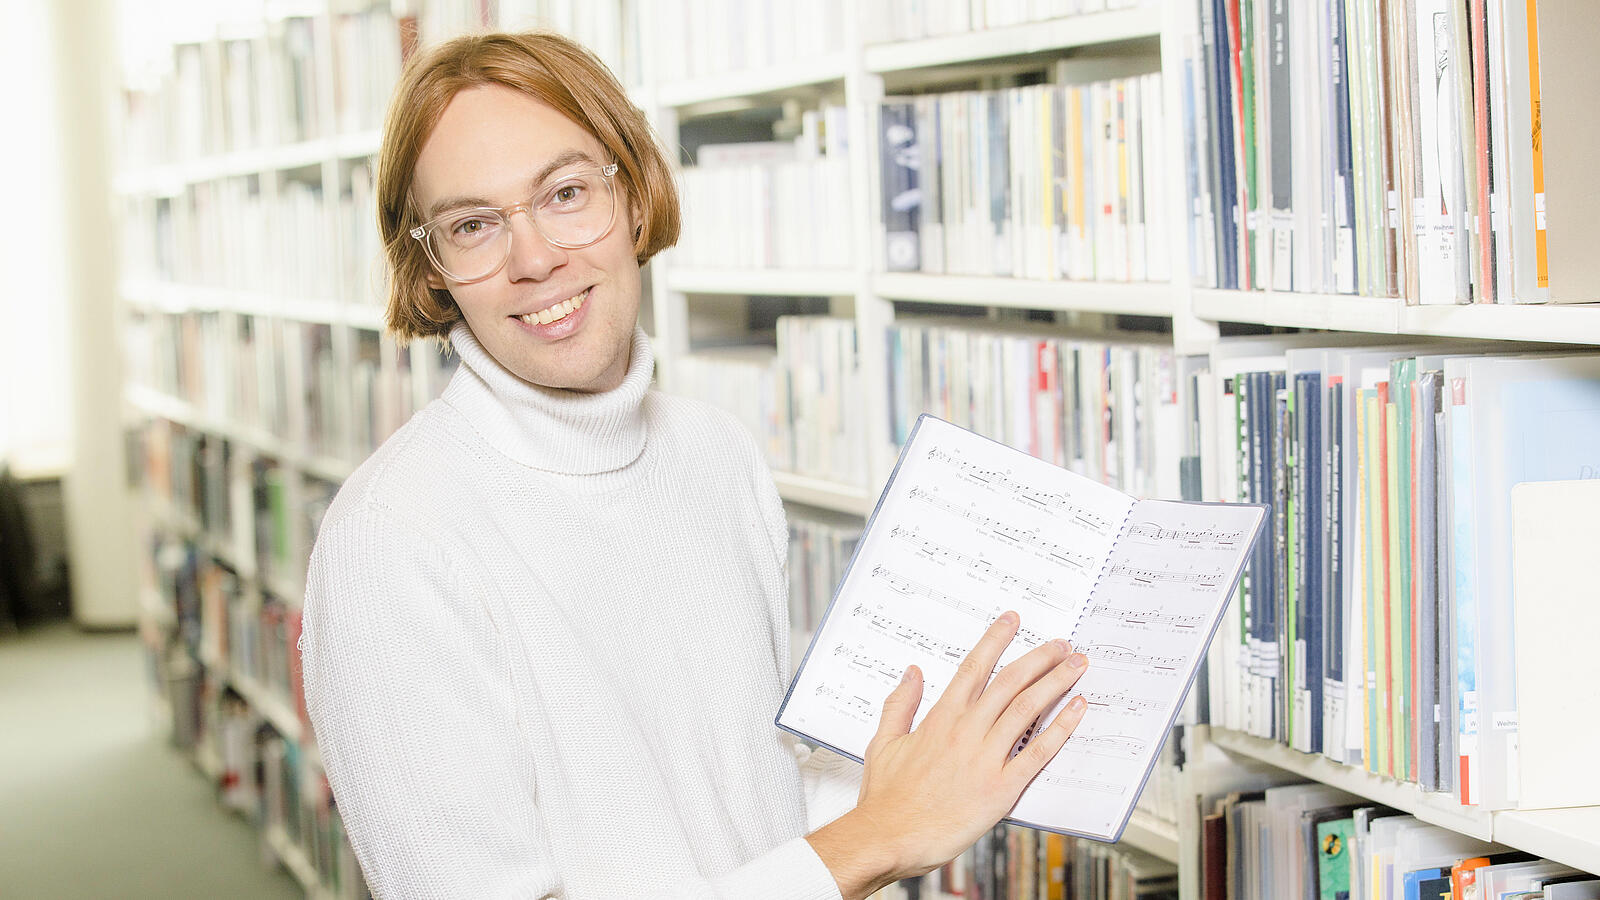 Young man with glasses stands in front of shelf in music library and holds open music book in hand